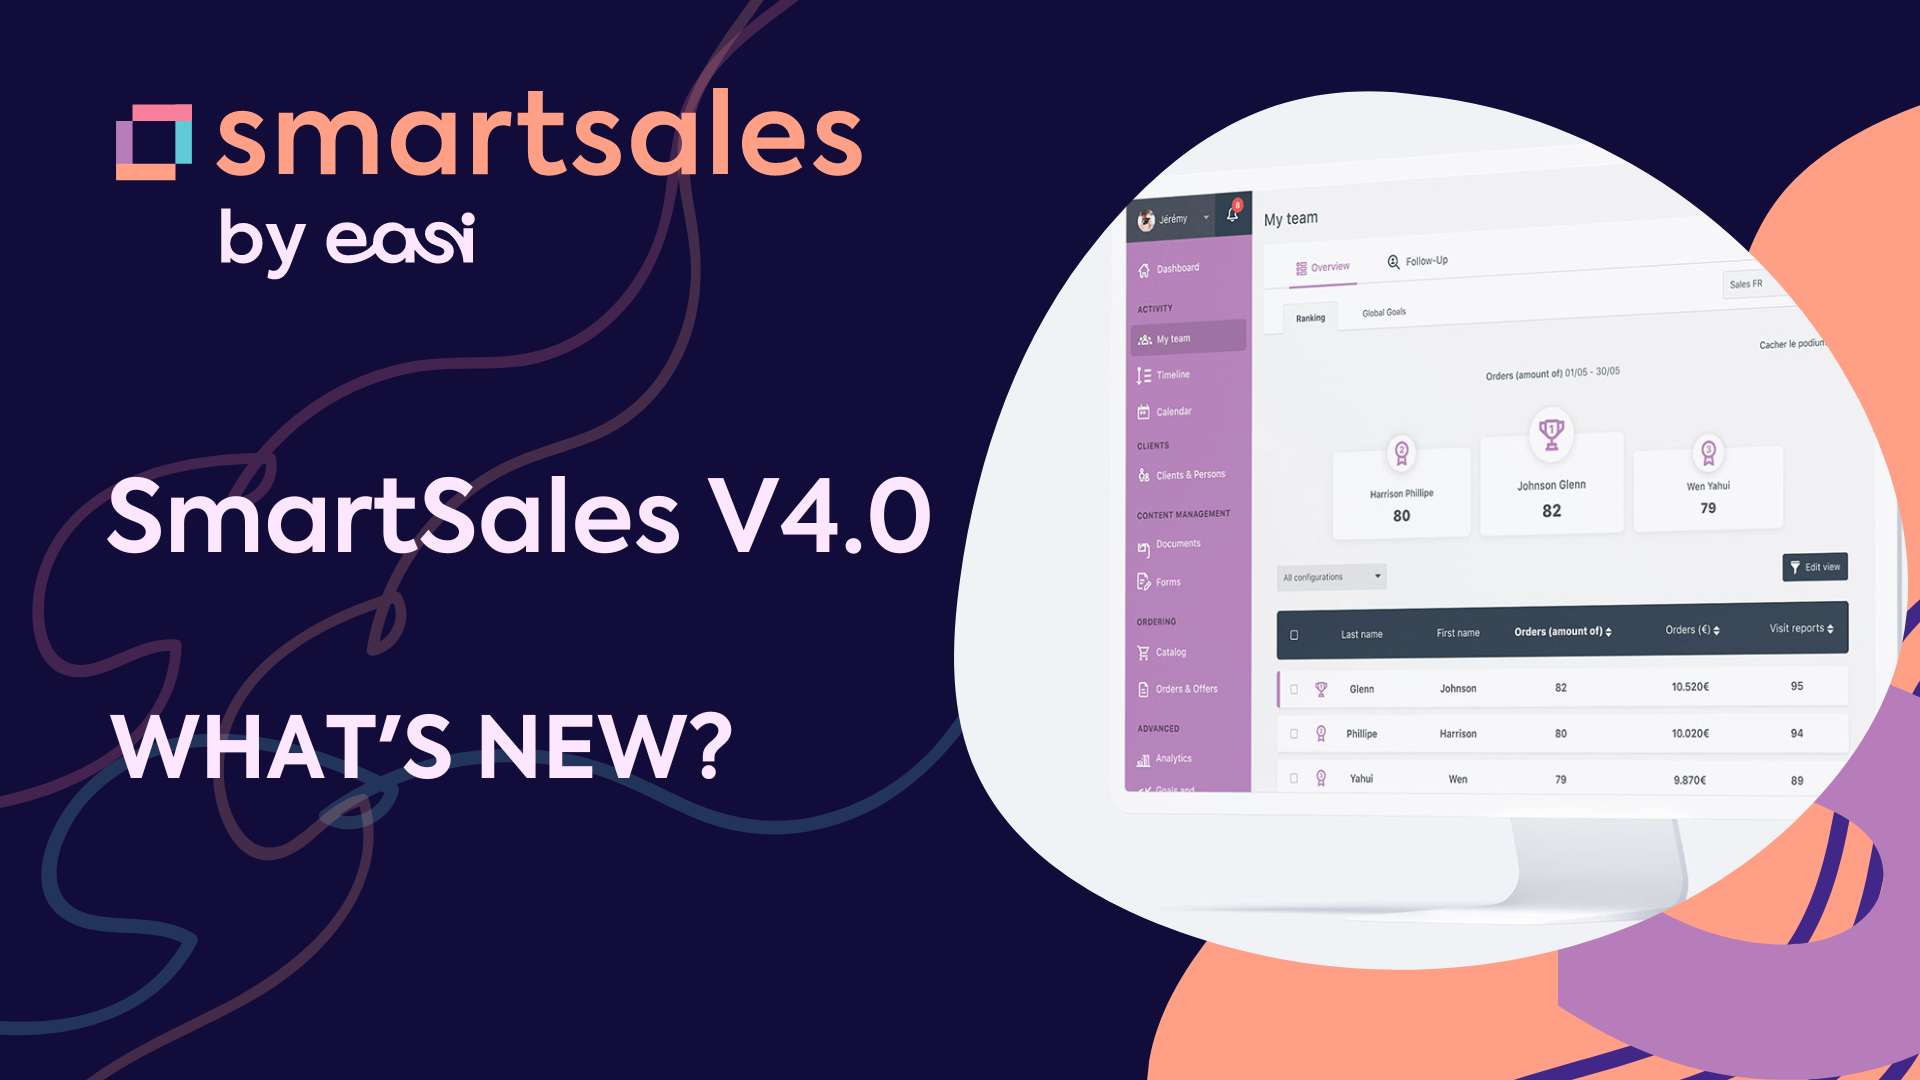 SmartSales V4.0: what's new?